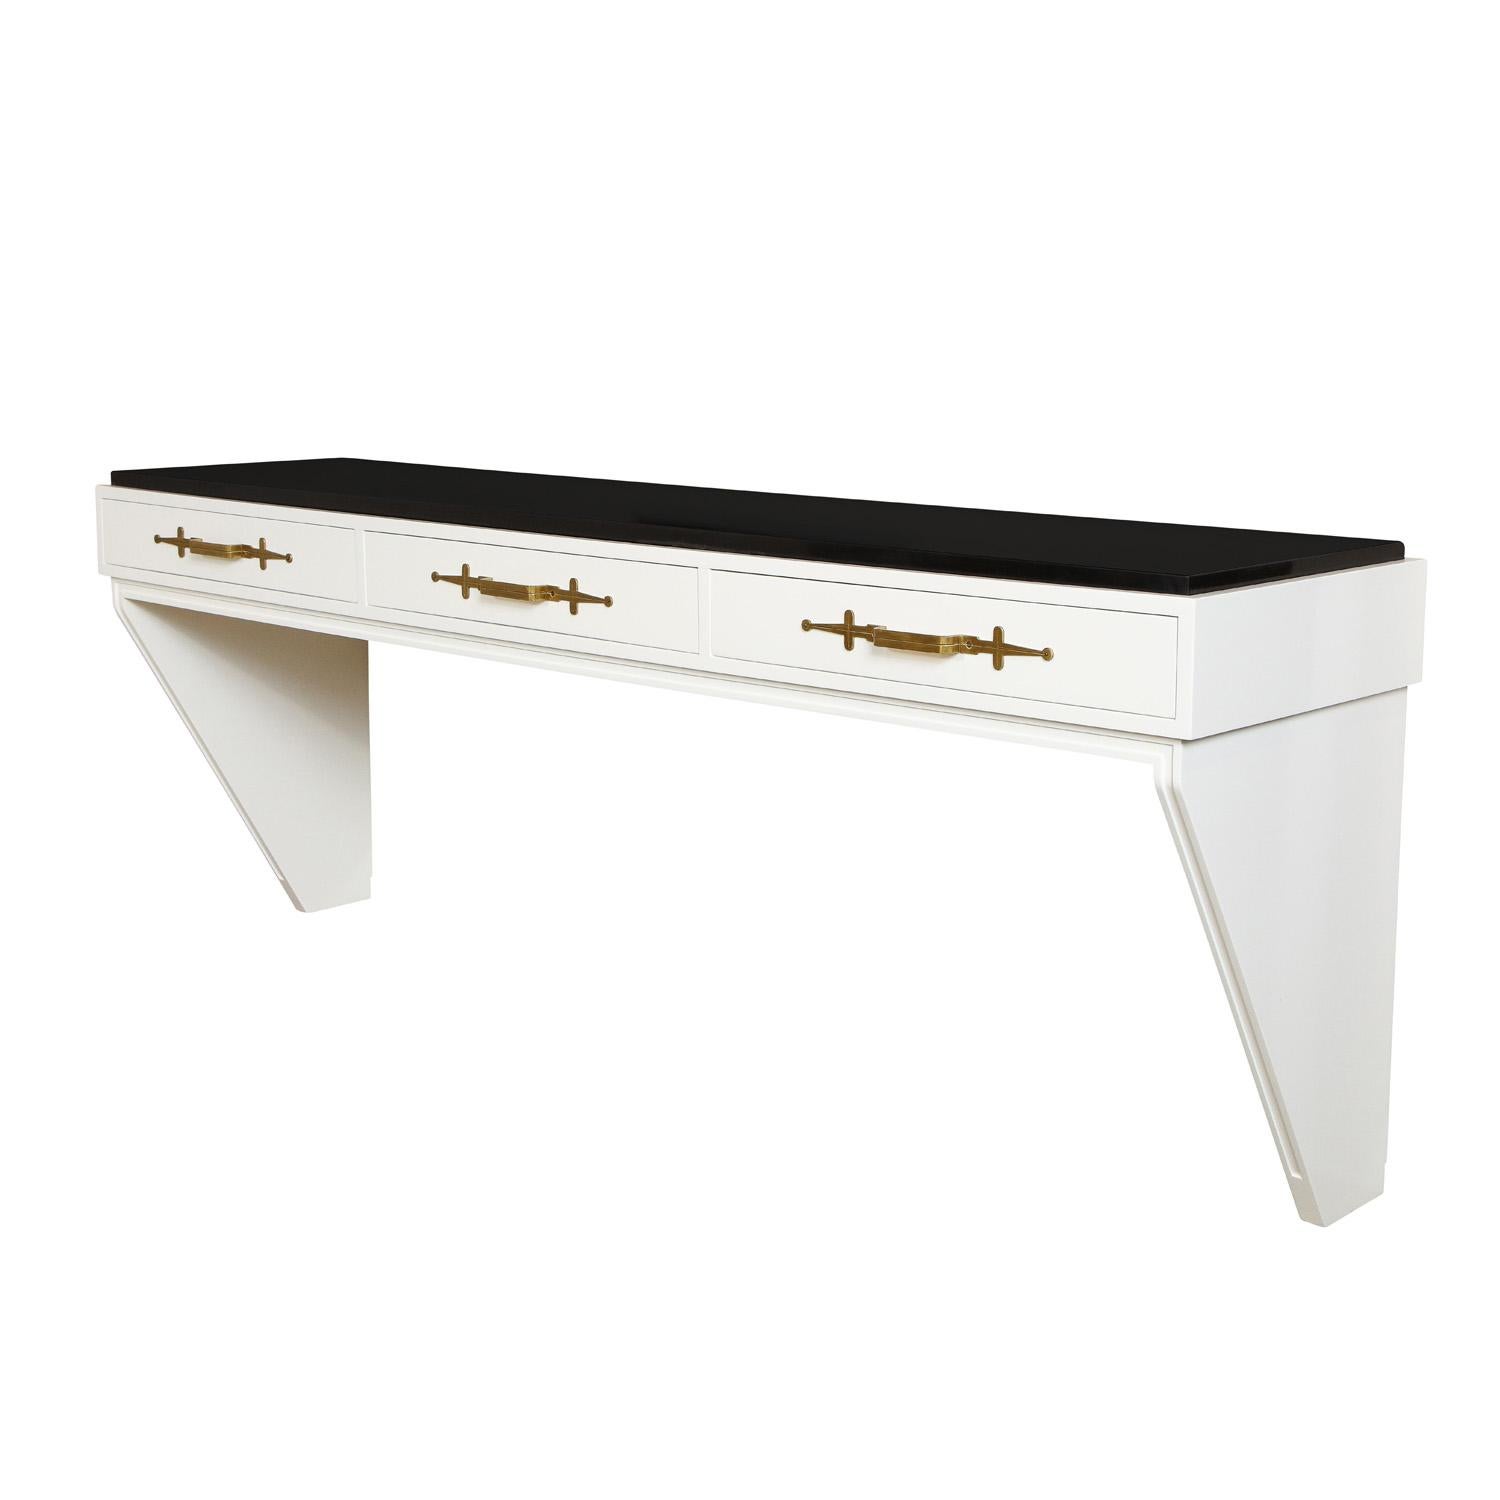 Elegant wall-mounted console table in white lacquer with inset black marble top and iconic etched brass pulls by Tommi Parzinger for Parzinger Originals, American, 1960's (signed). This console is emblematic of the superb craftsmanship and design of